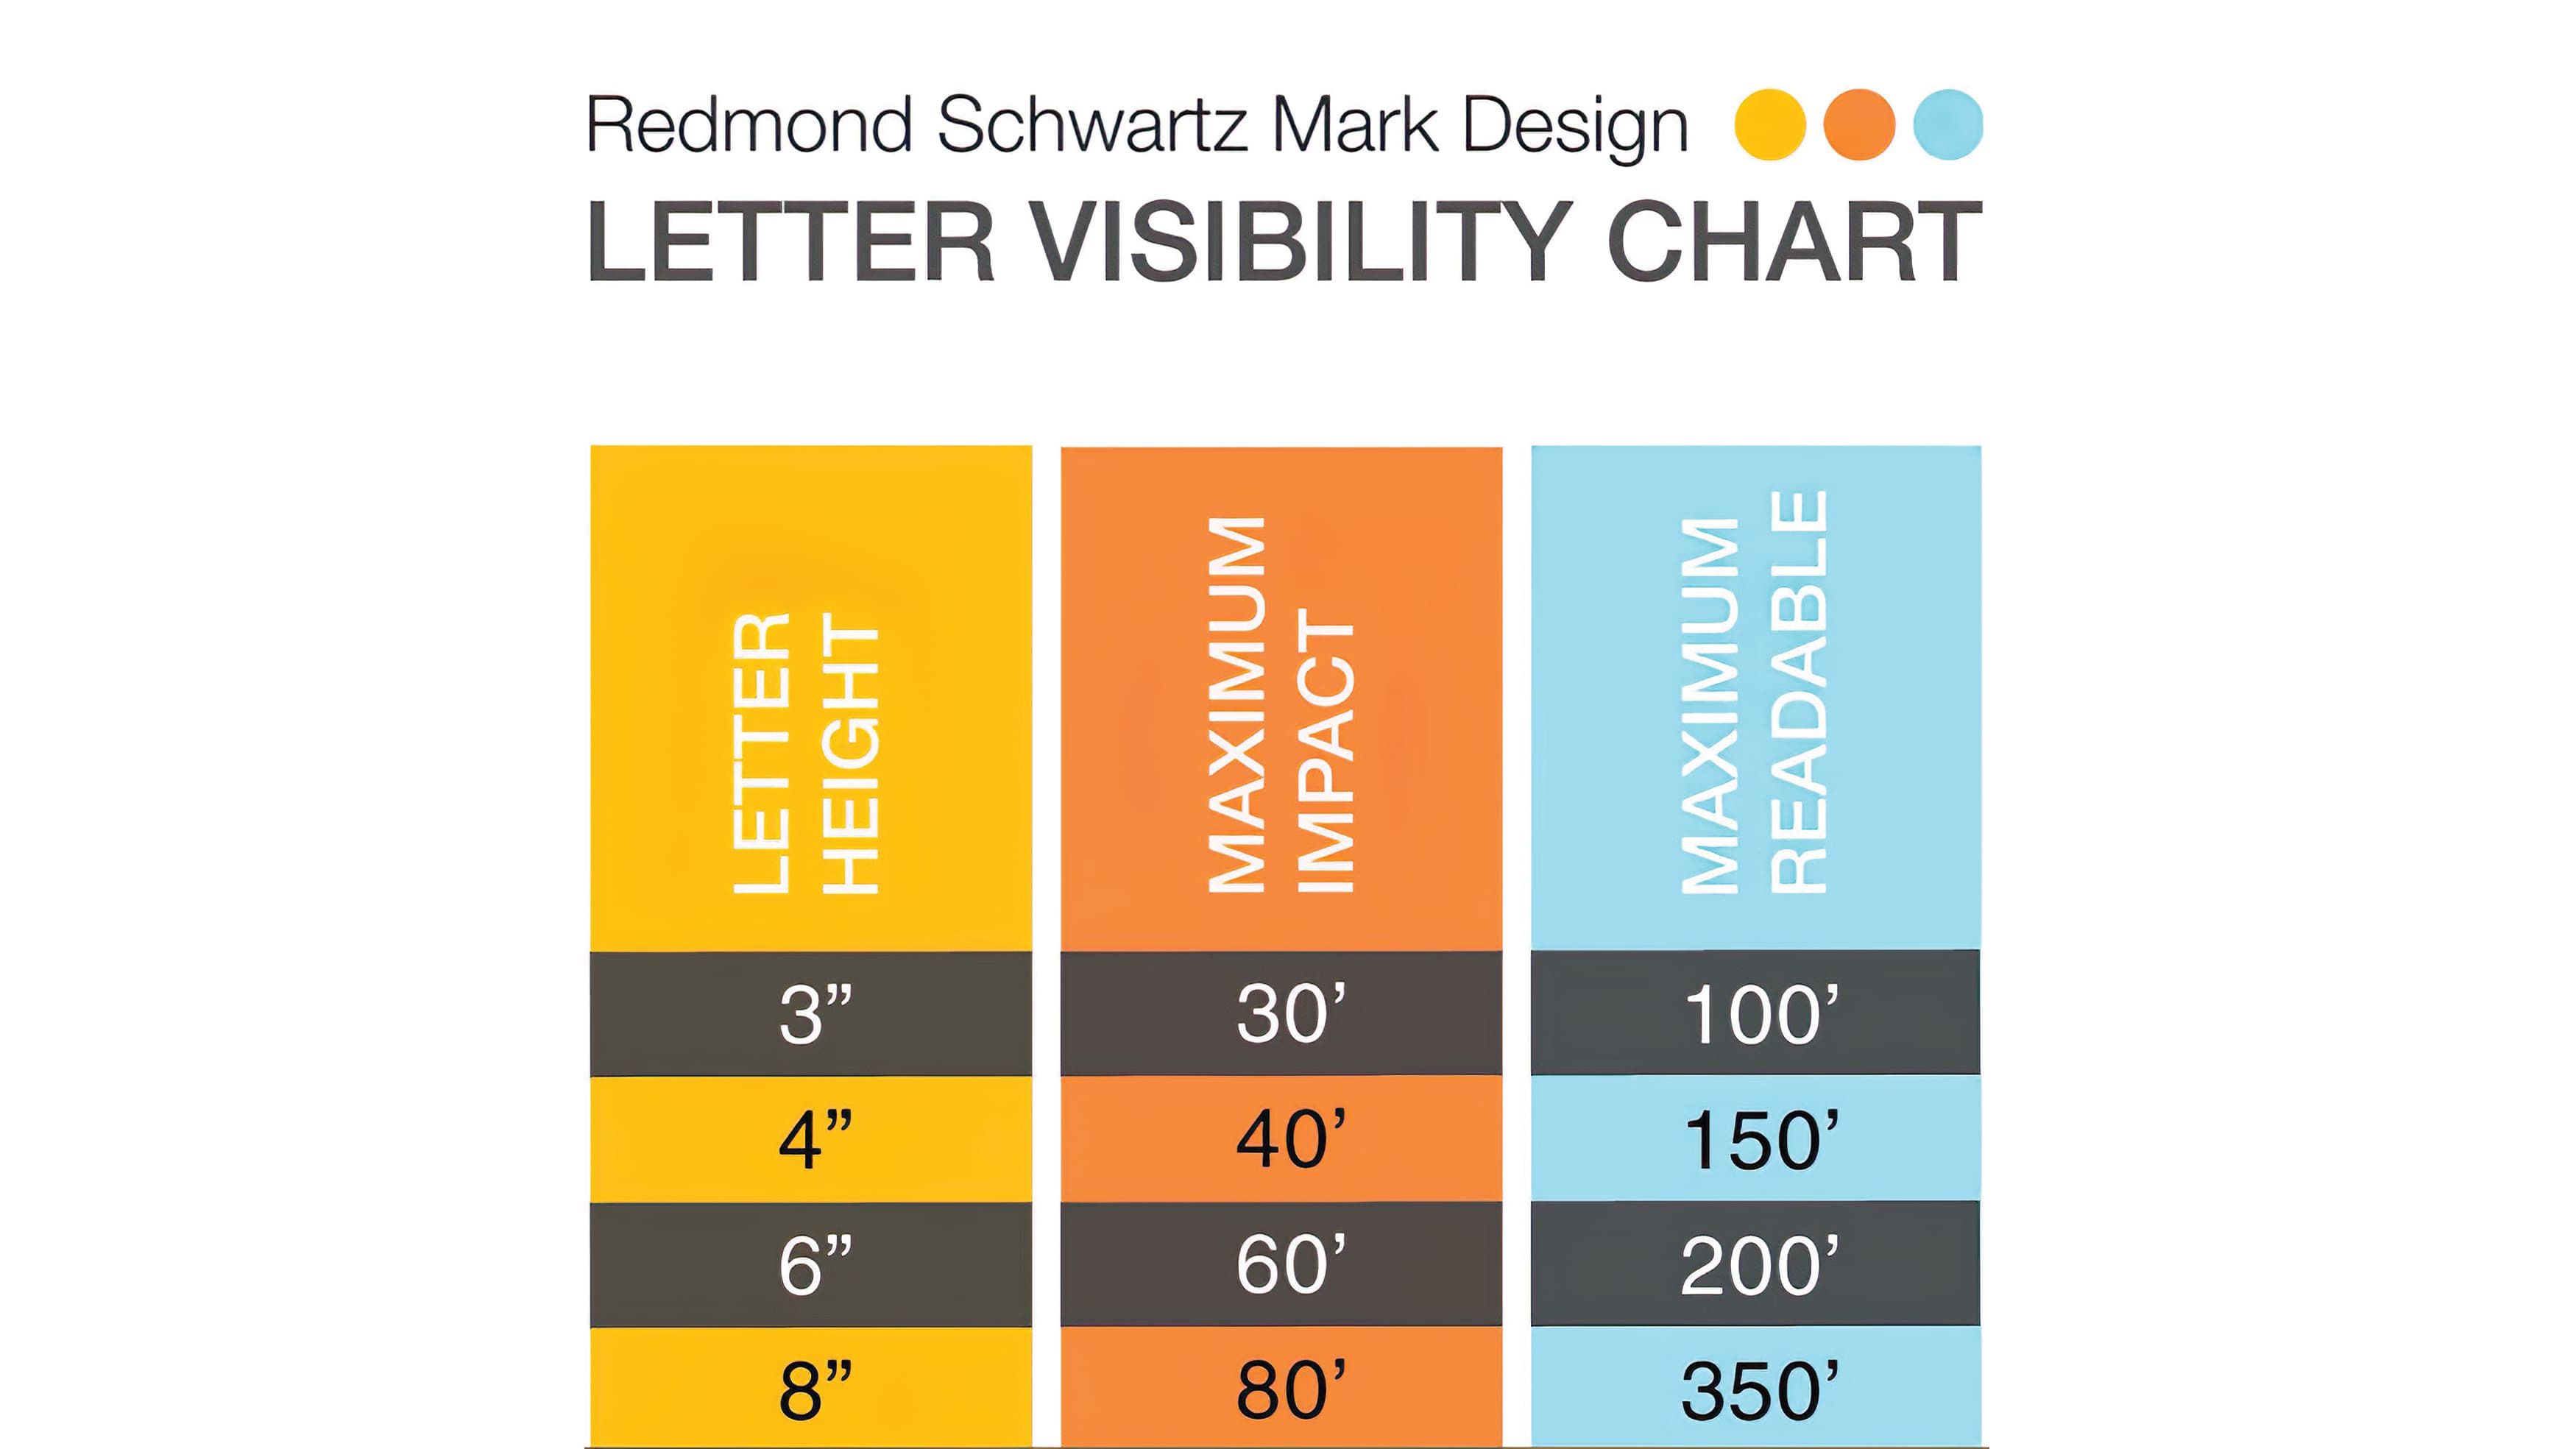 RSM Design's Letter Visibility Chart indicating proper letter height, maximum impact, and maximum readability.